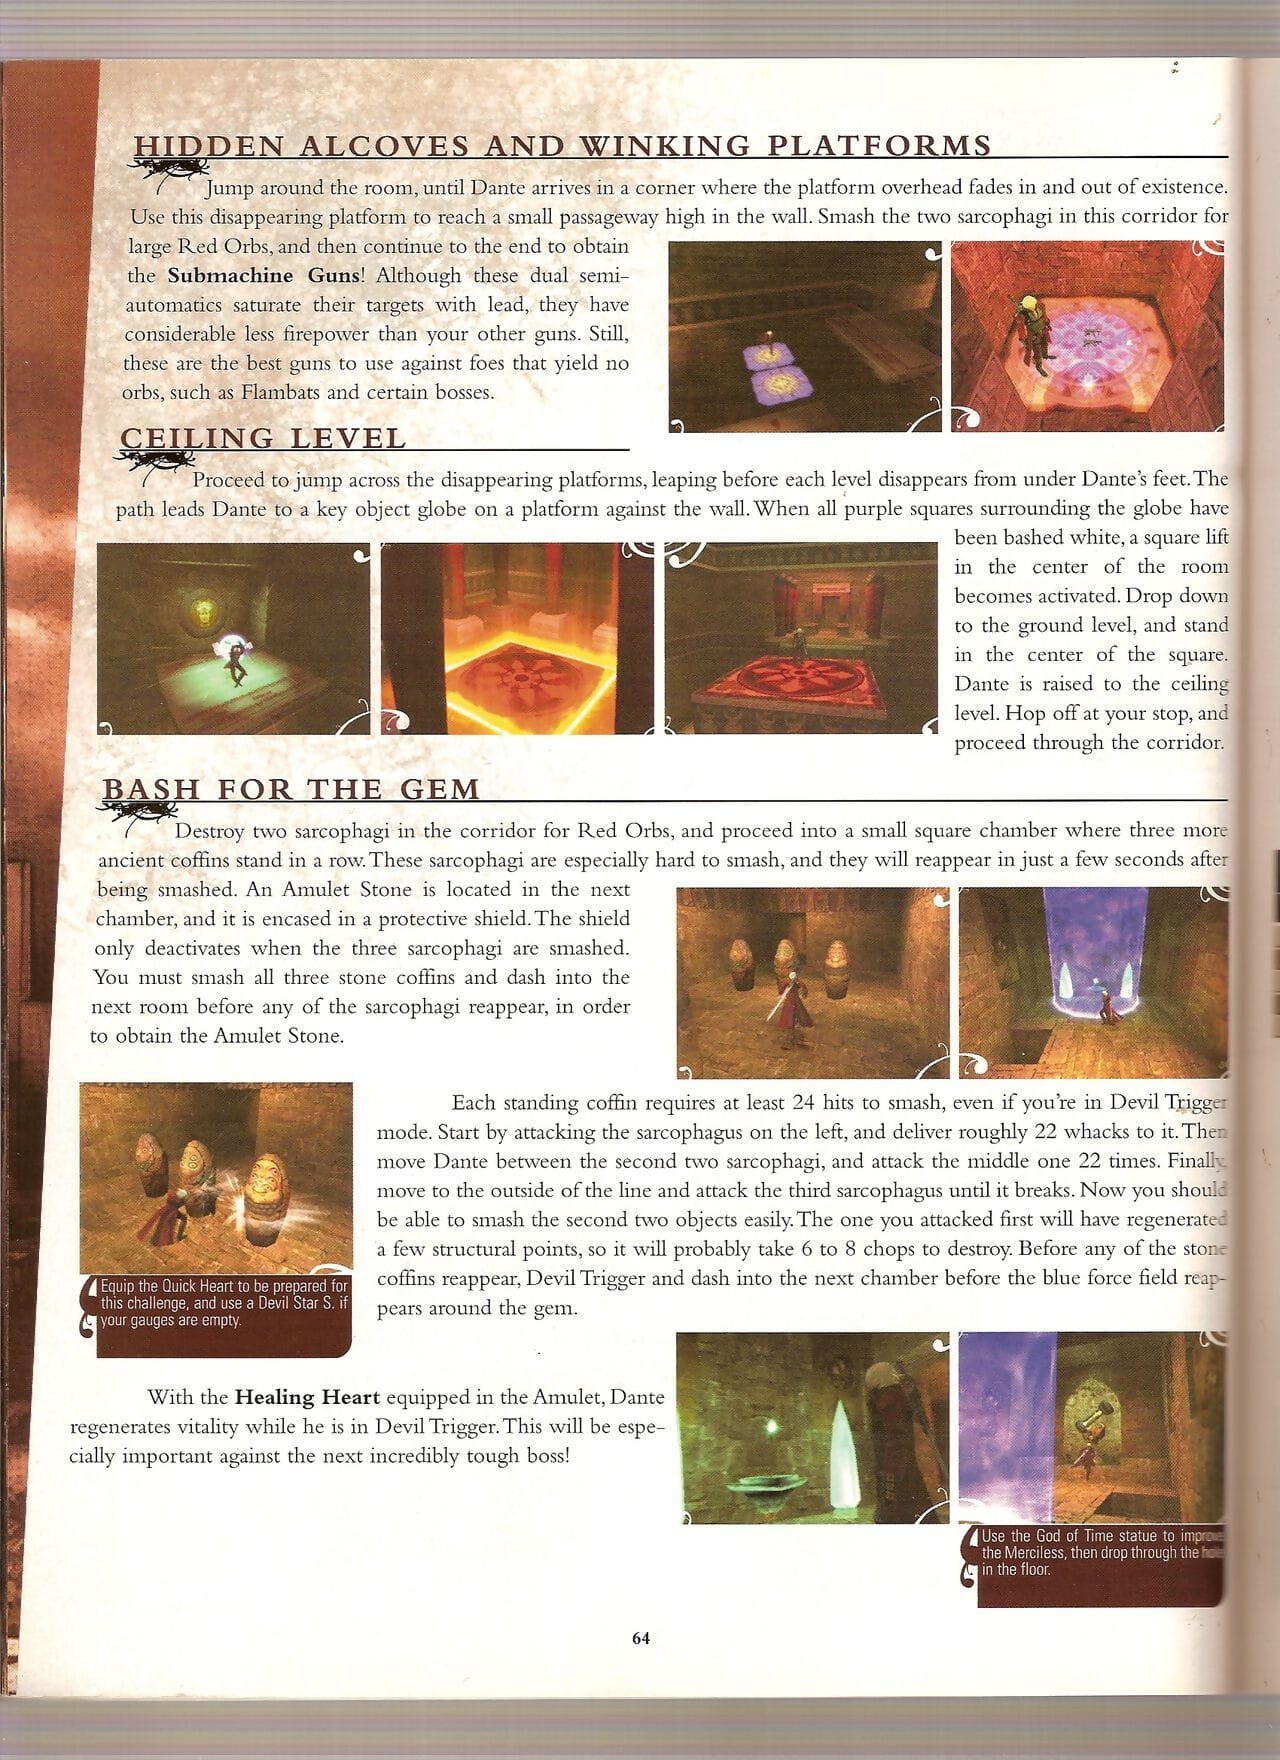 Devil May Cry 2 Official Strategy Guide - part 4